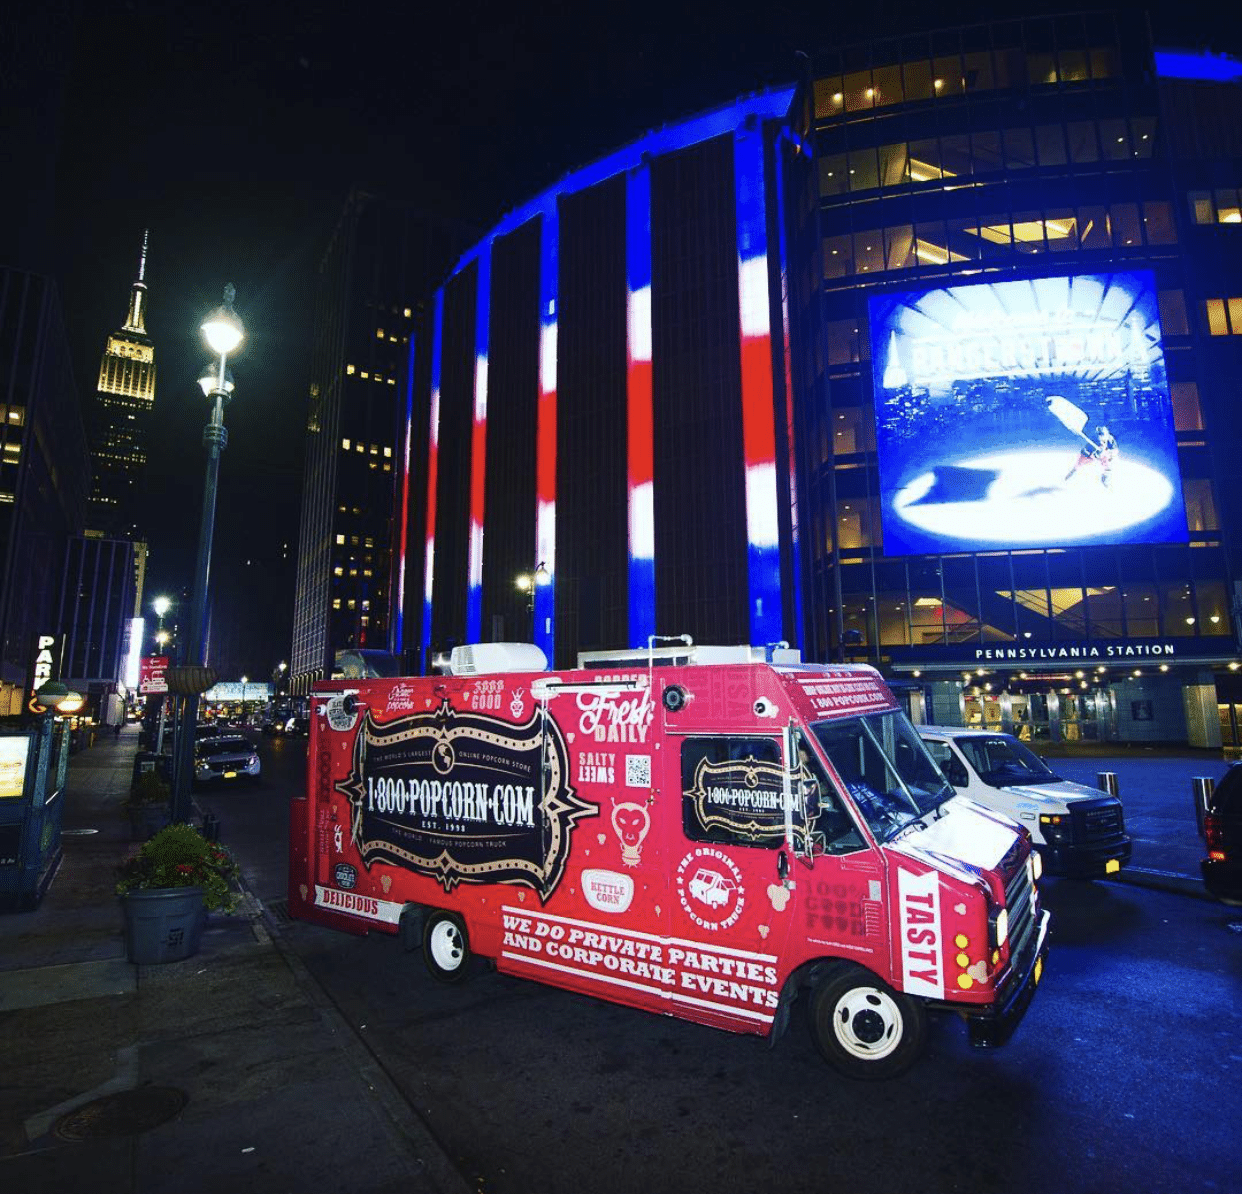 NYC Food Truck 1-800 Popcorn Catering